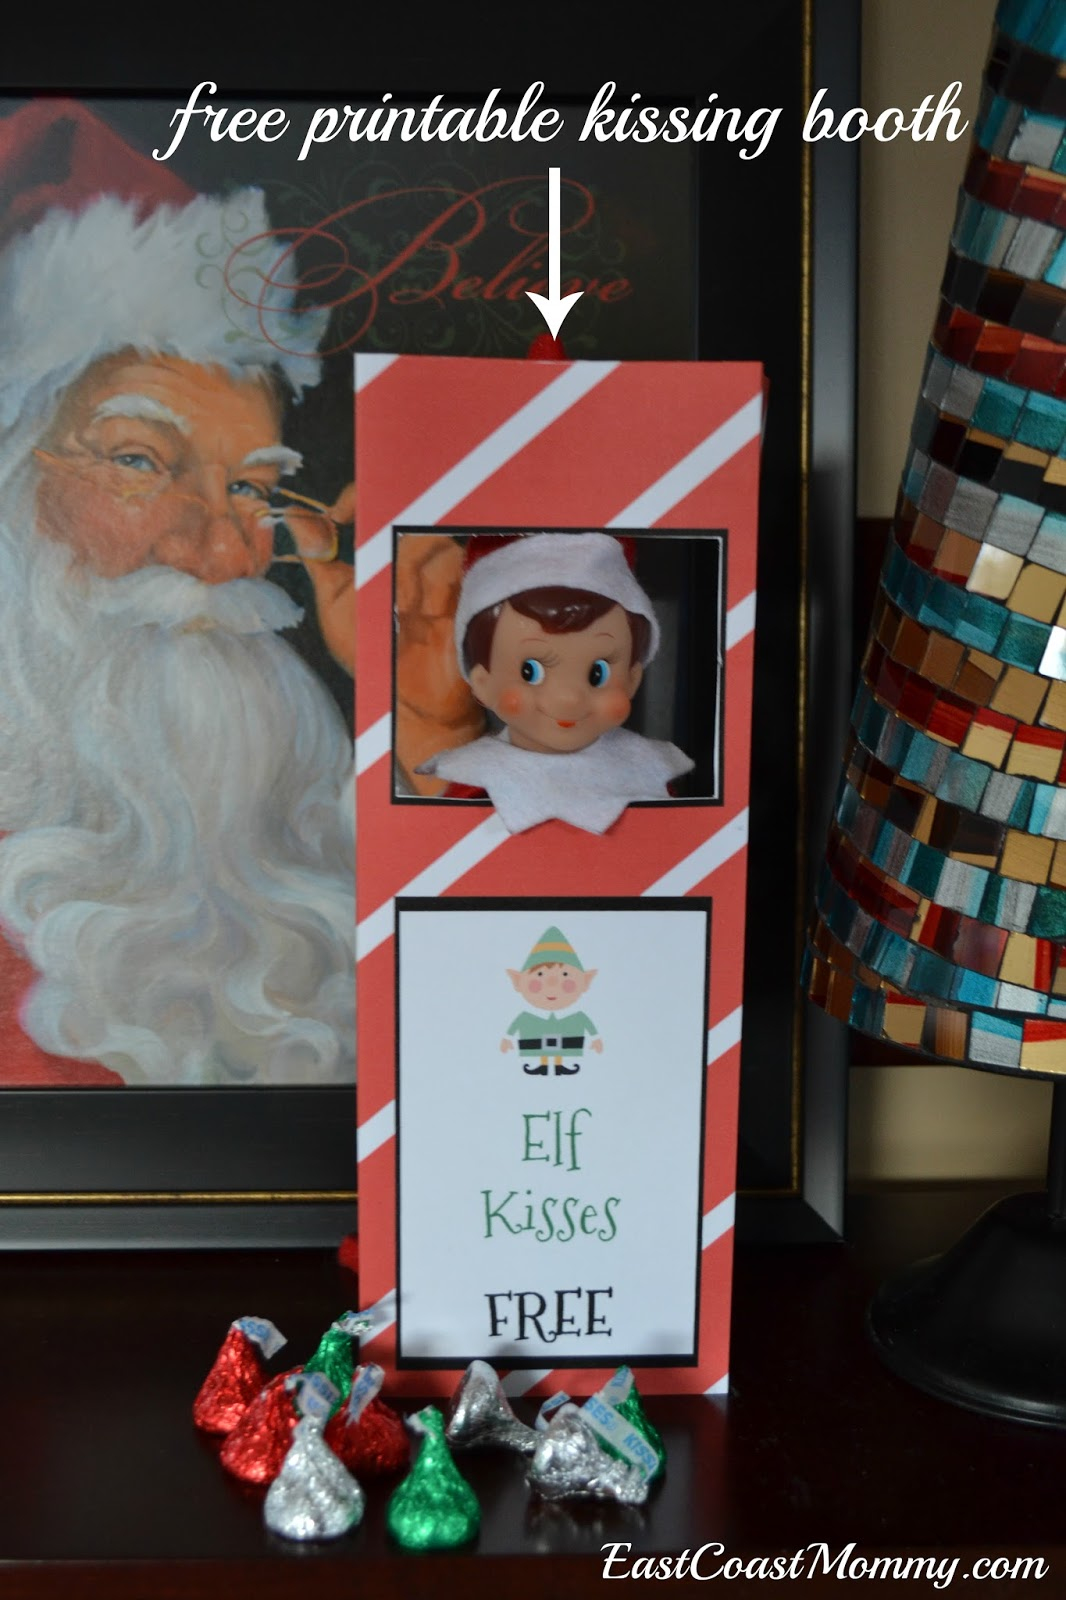 East Coast Mommy Elf Kissing Booth free Printable 